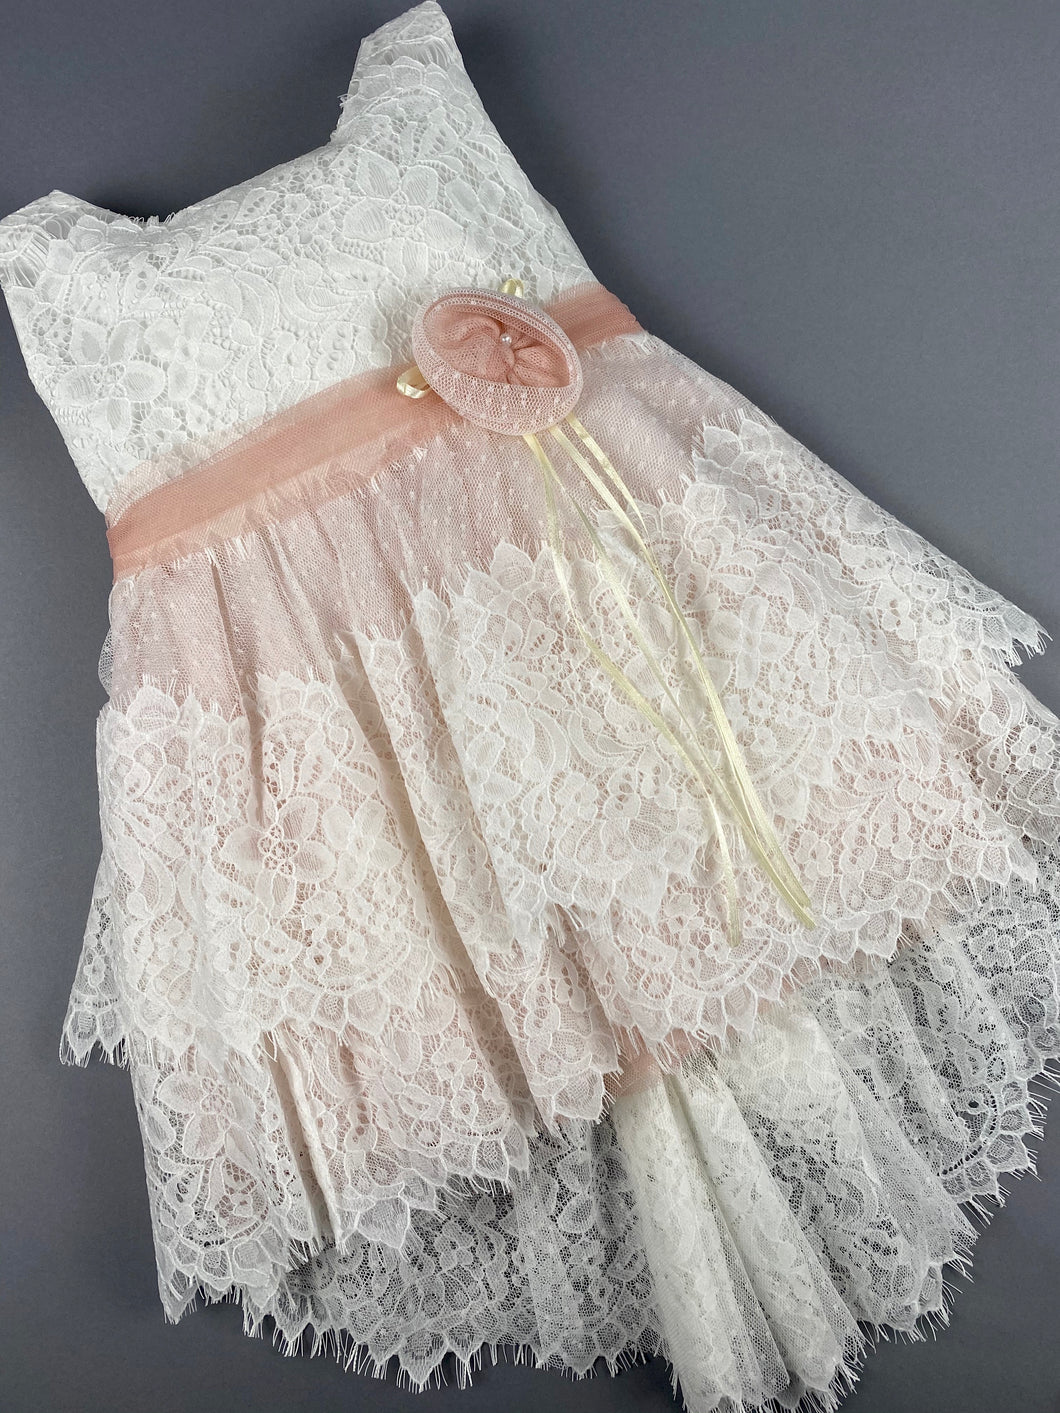 Dress 49 Girls Baptismal Christening Sleeveless 3pc  Dress , matching Bolero and Hat. Made in Greece exclusively for Rosies Collections.